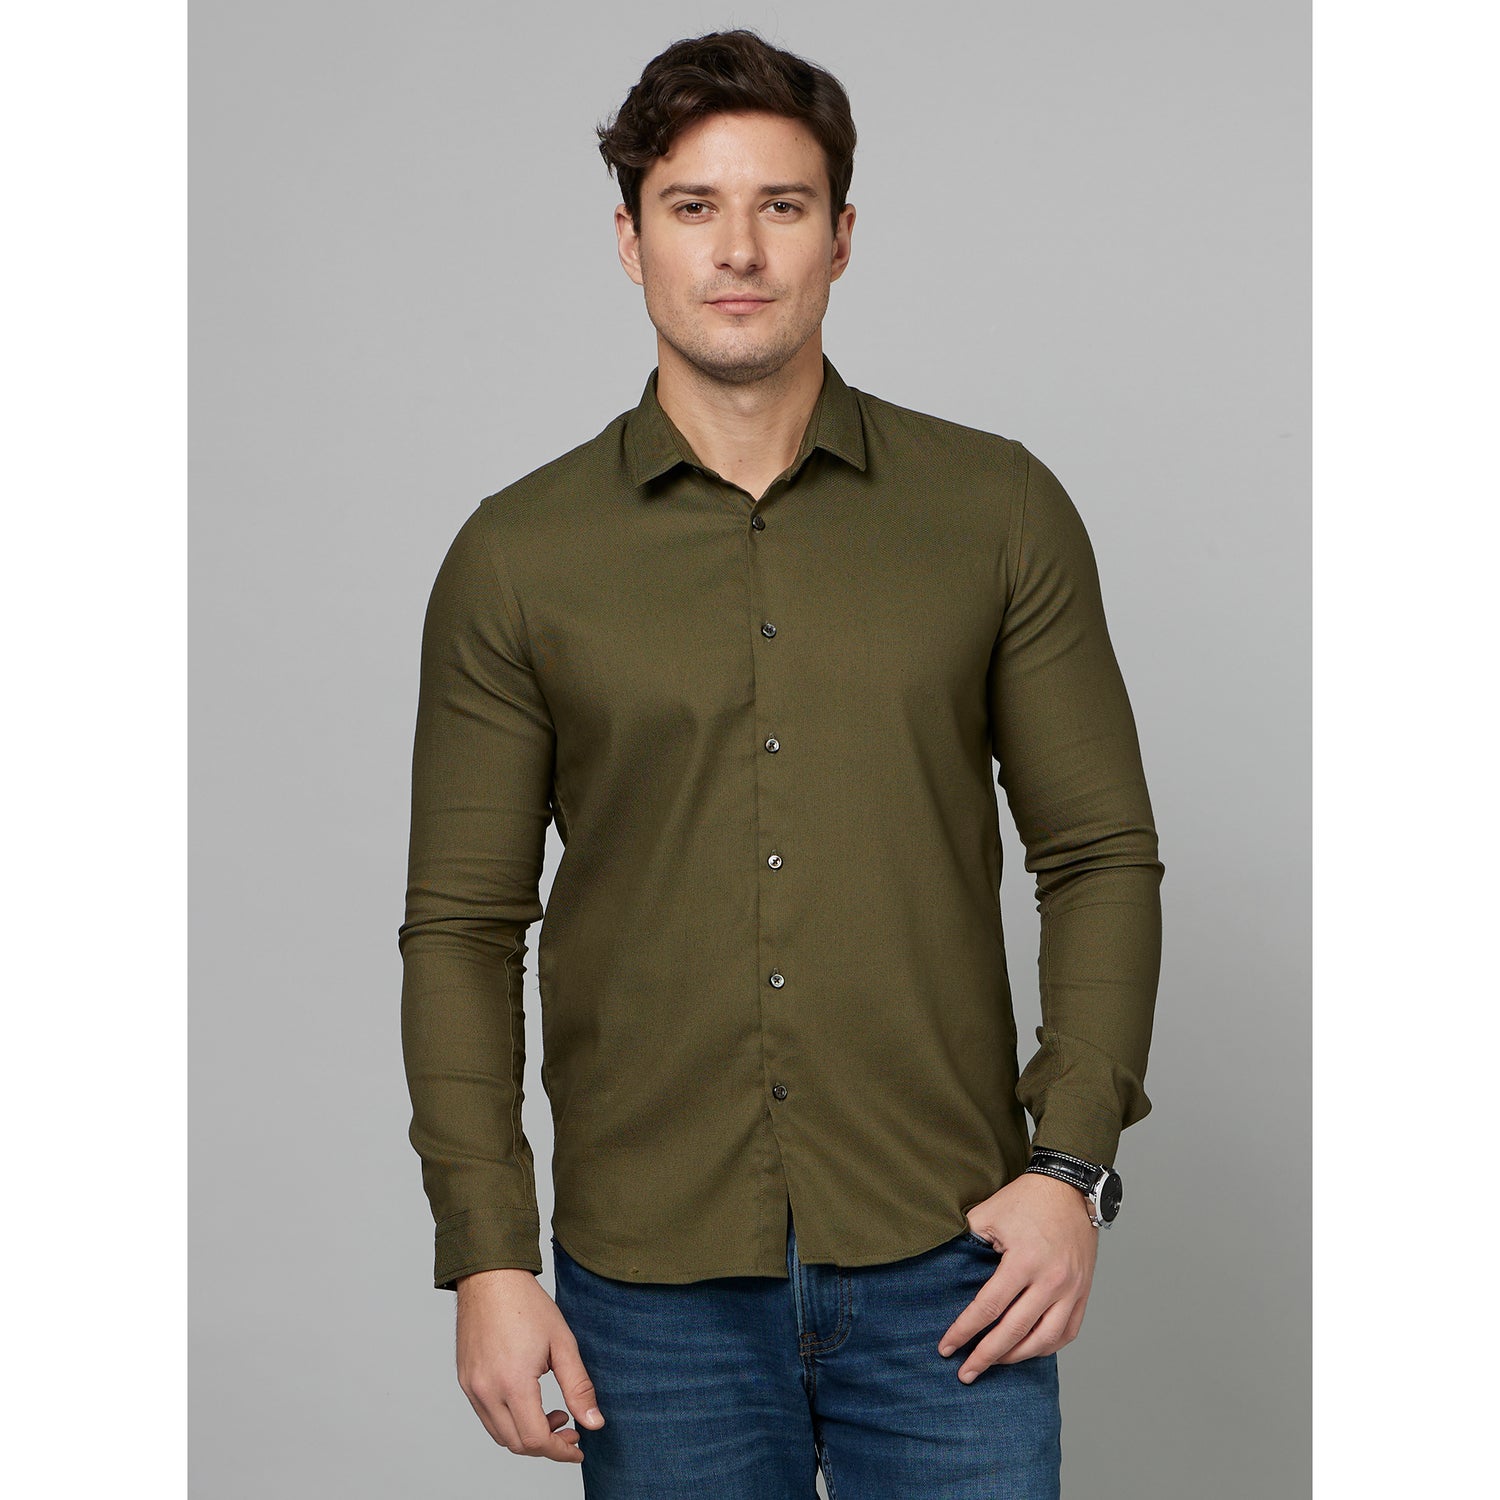 Olive Green Classic Spread Collar Cotton Casual Shirt (FAPOL)